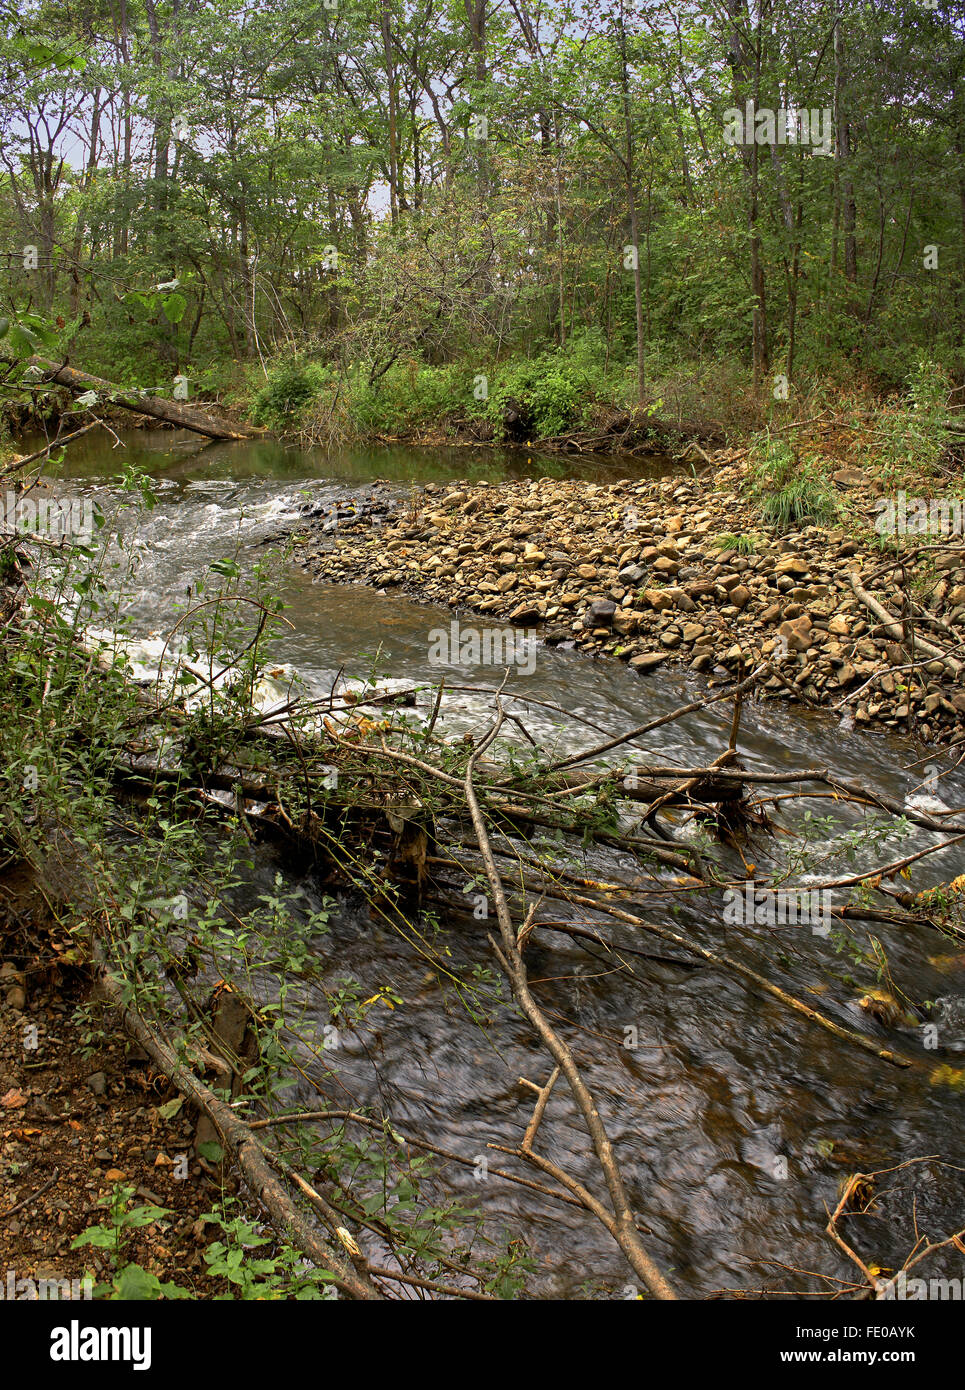 Fallen tree over a river panorama Stock Photo